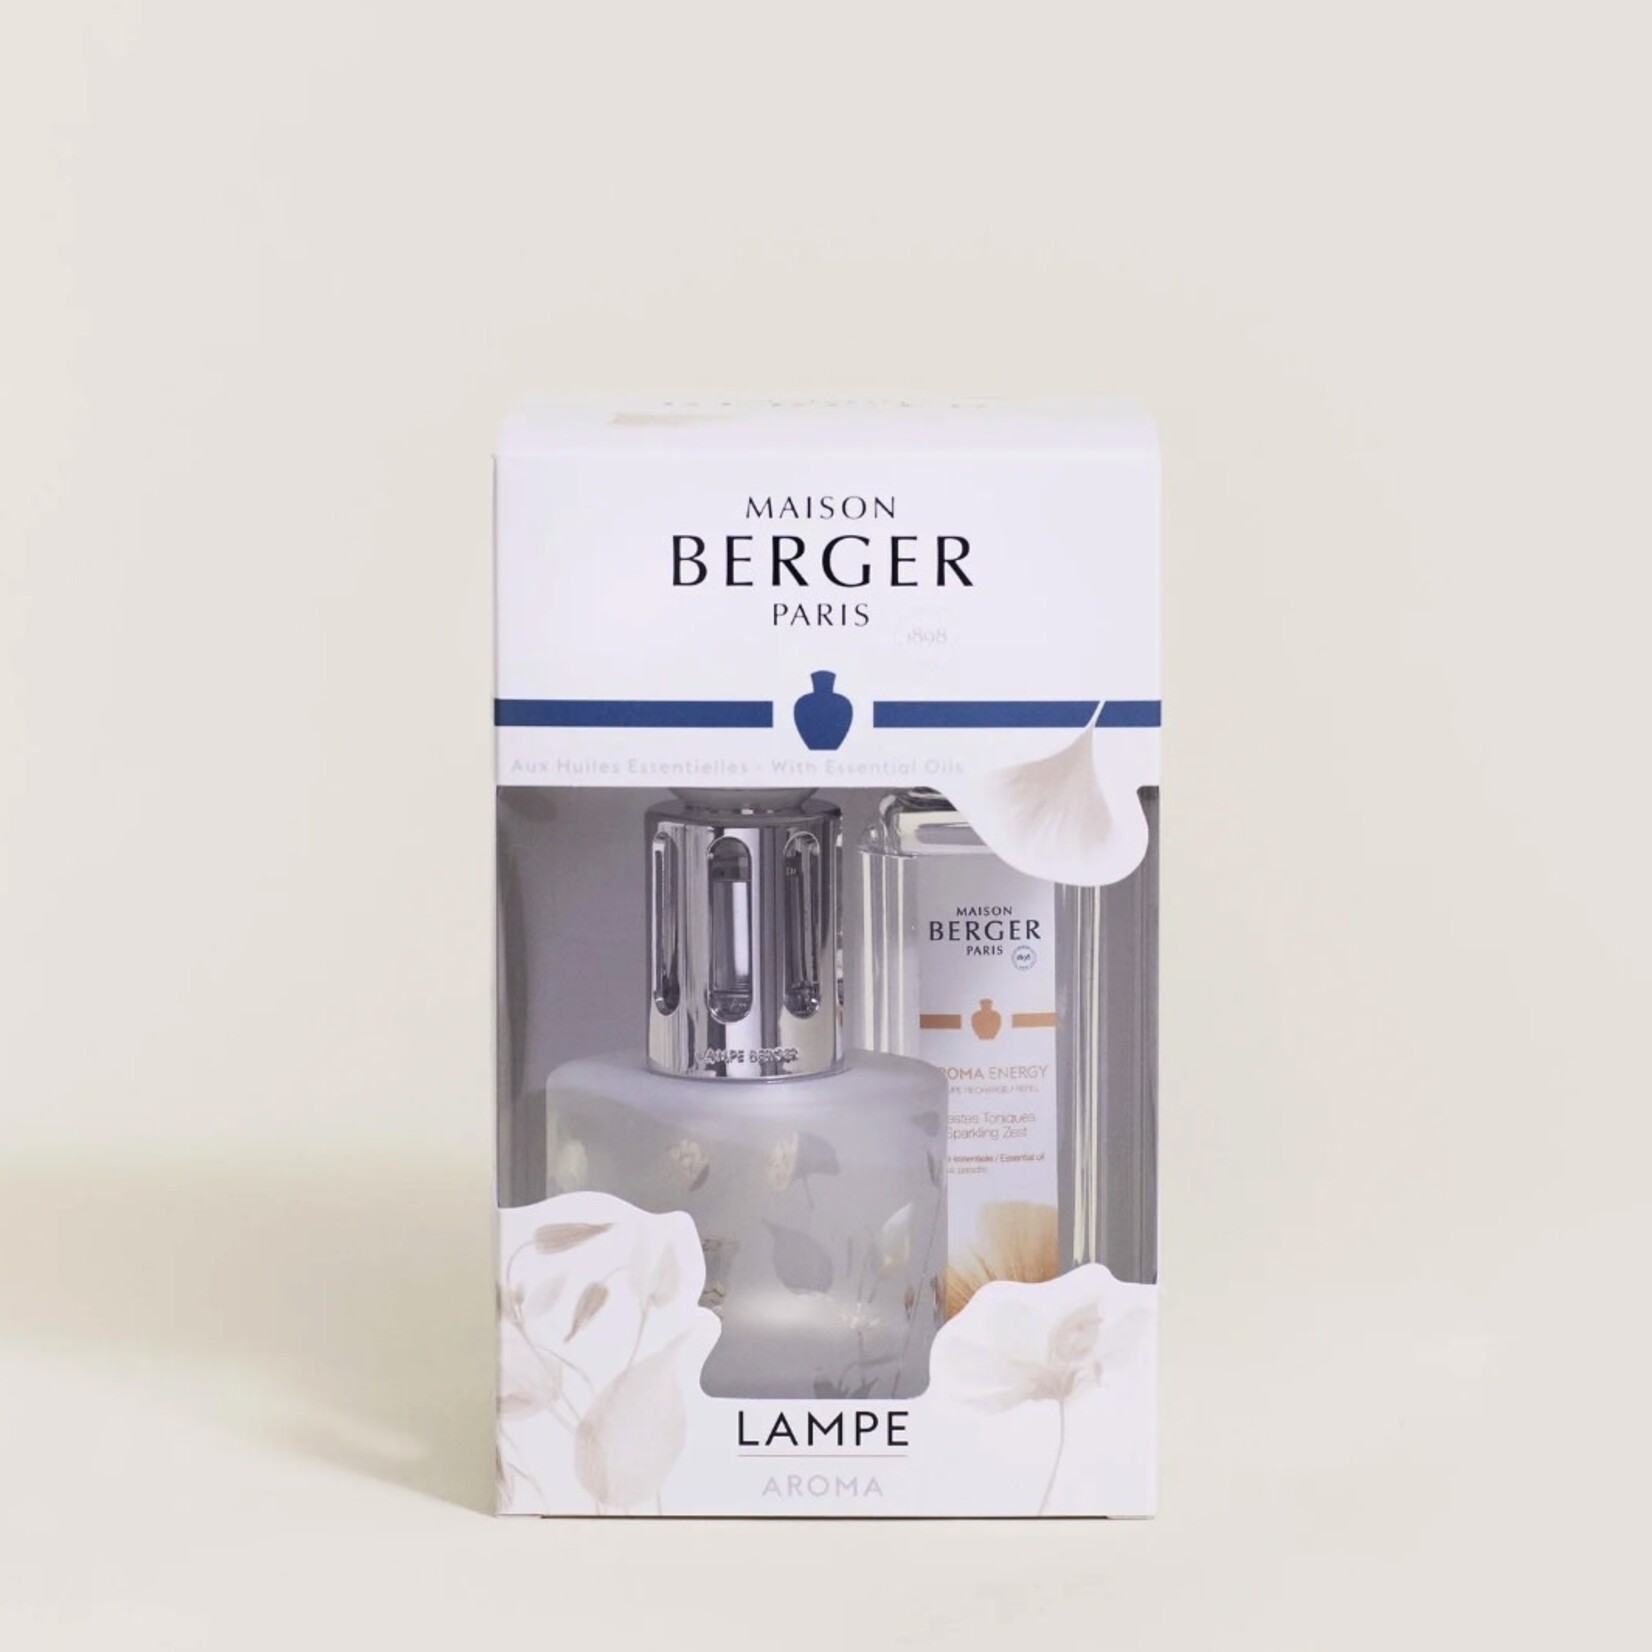 Maison Berger Paris Aroma Energy Lamp Berger Gift Pack -Frosted Glass